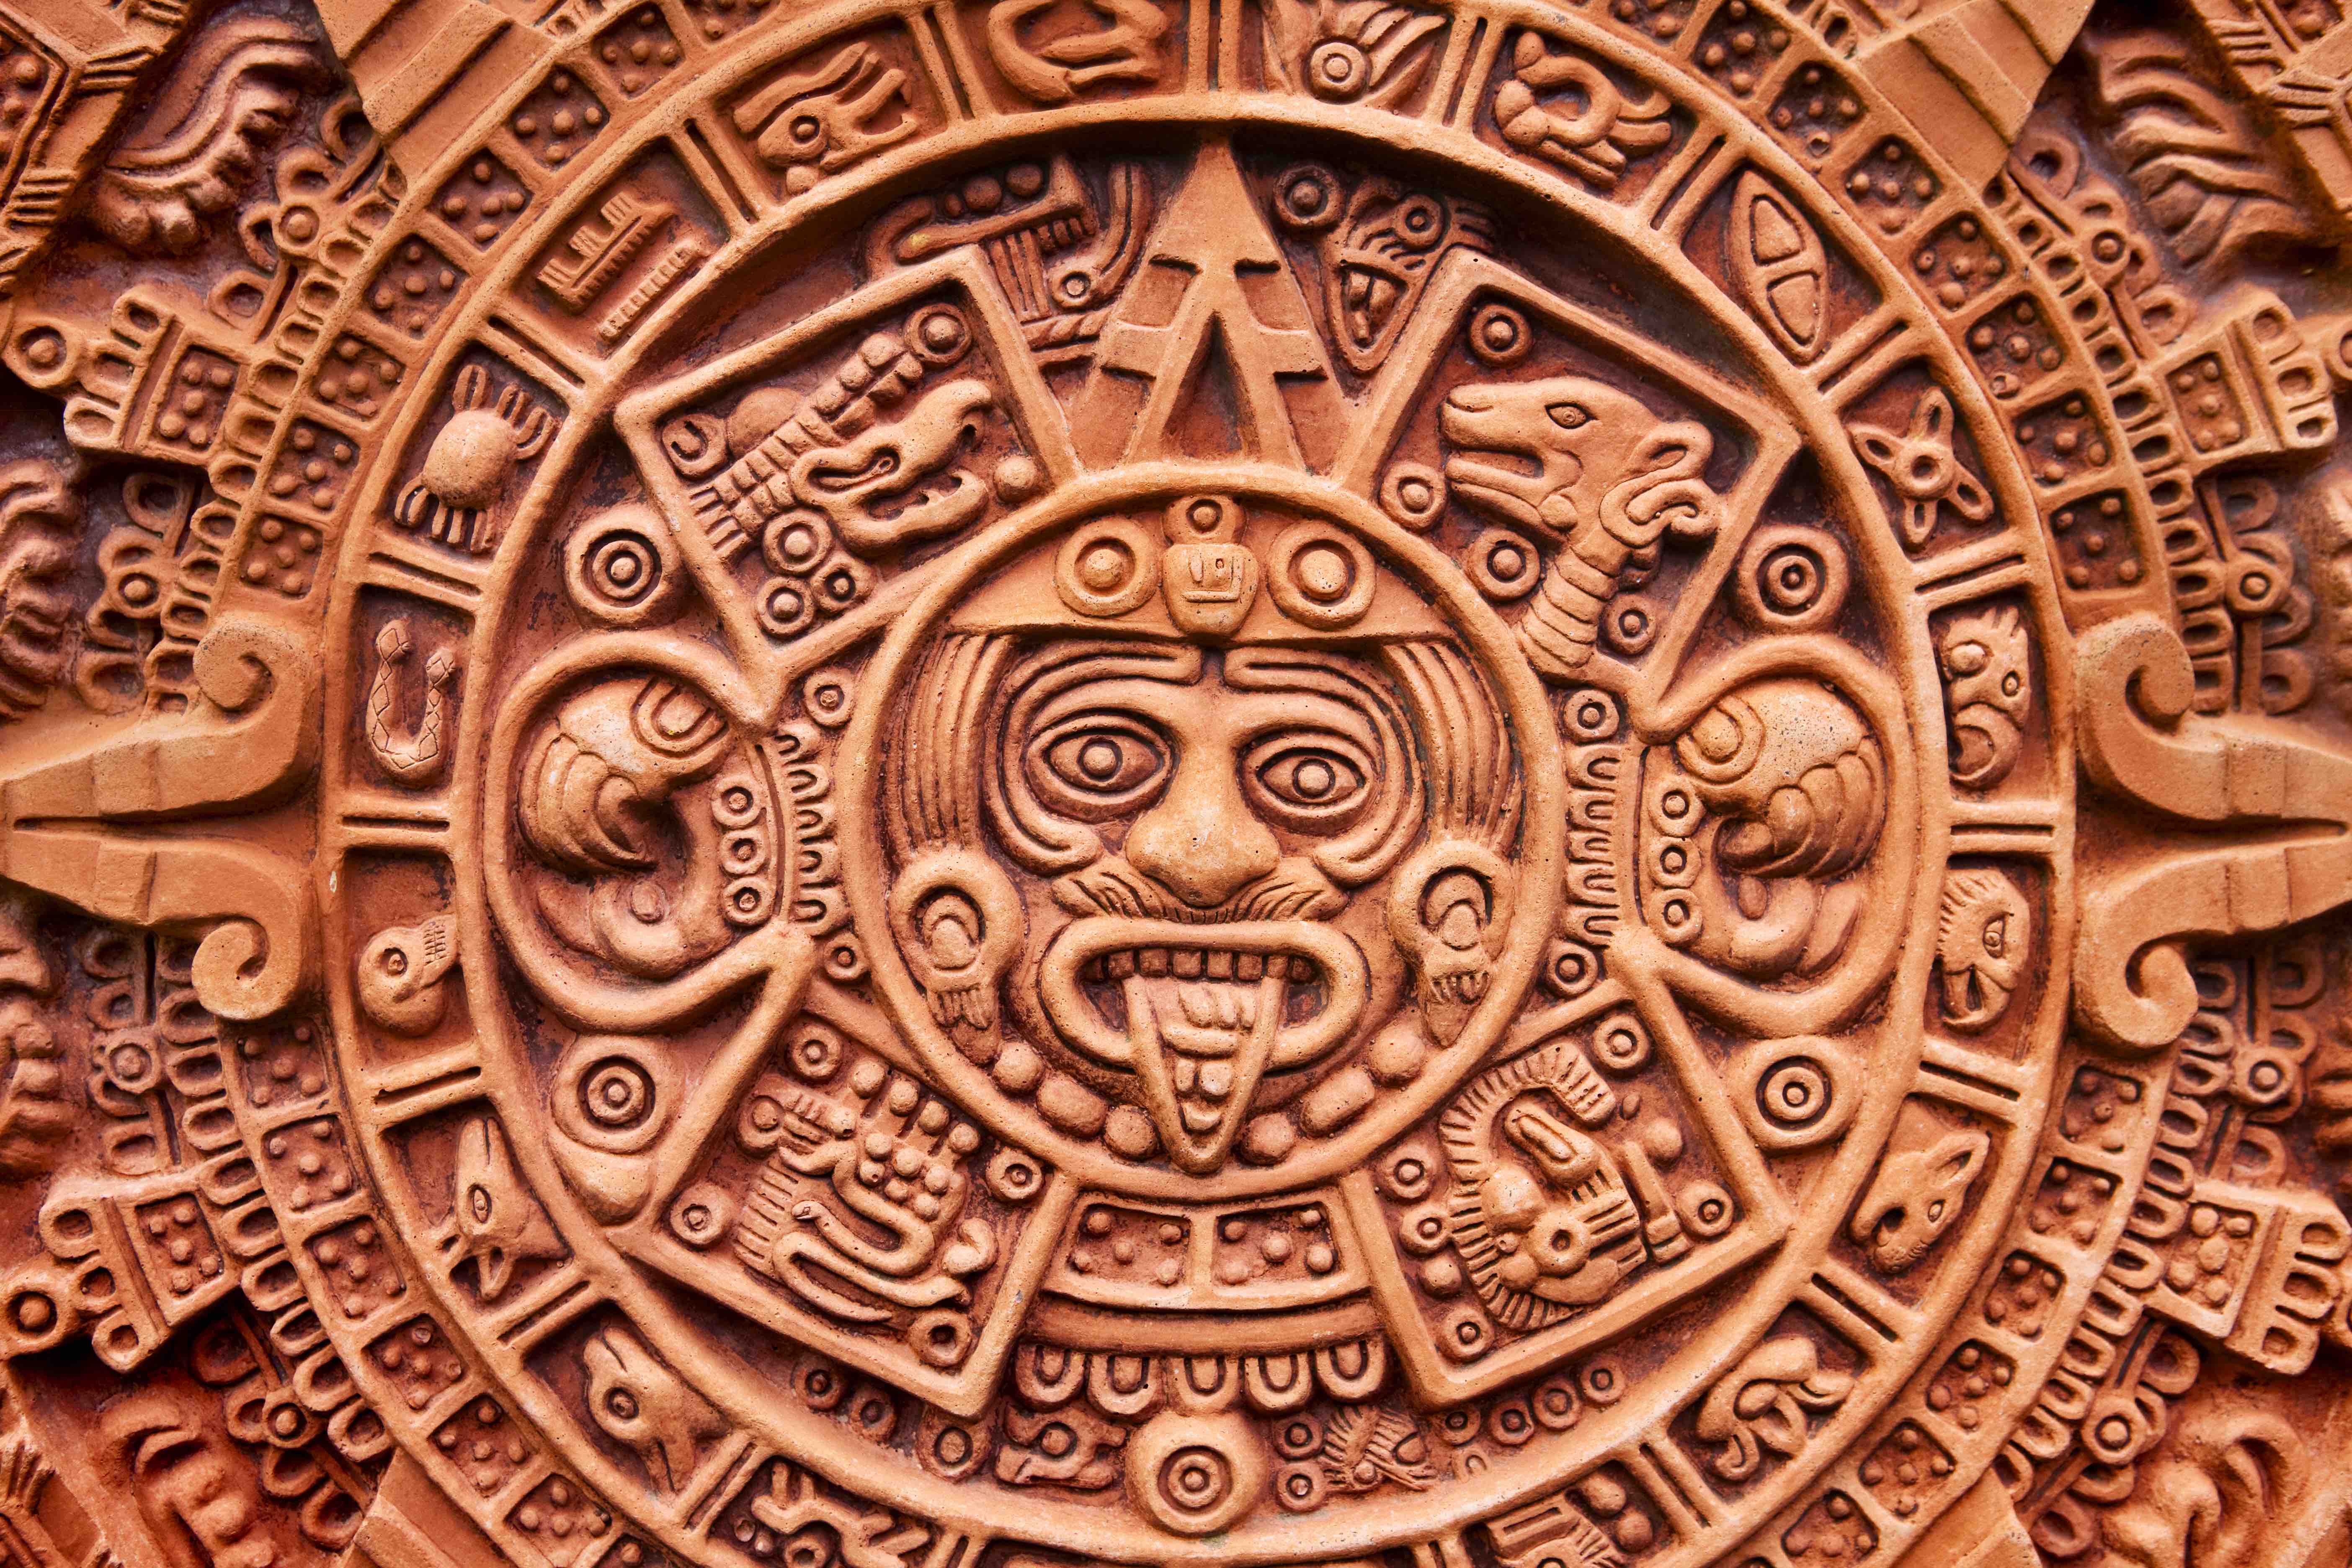 Scientists Have New Evidence About What Bacteria Likely Killed Aztecs